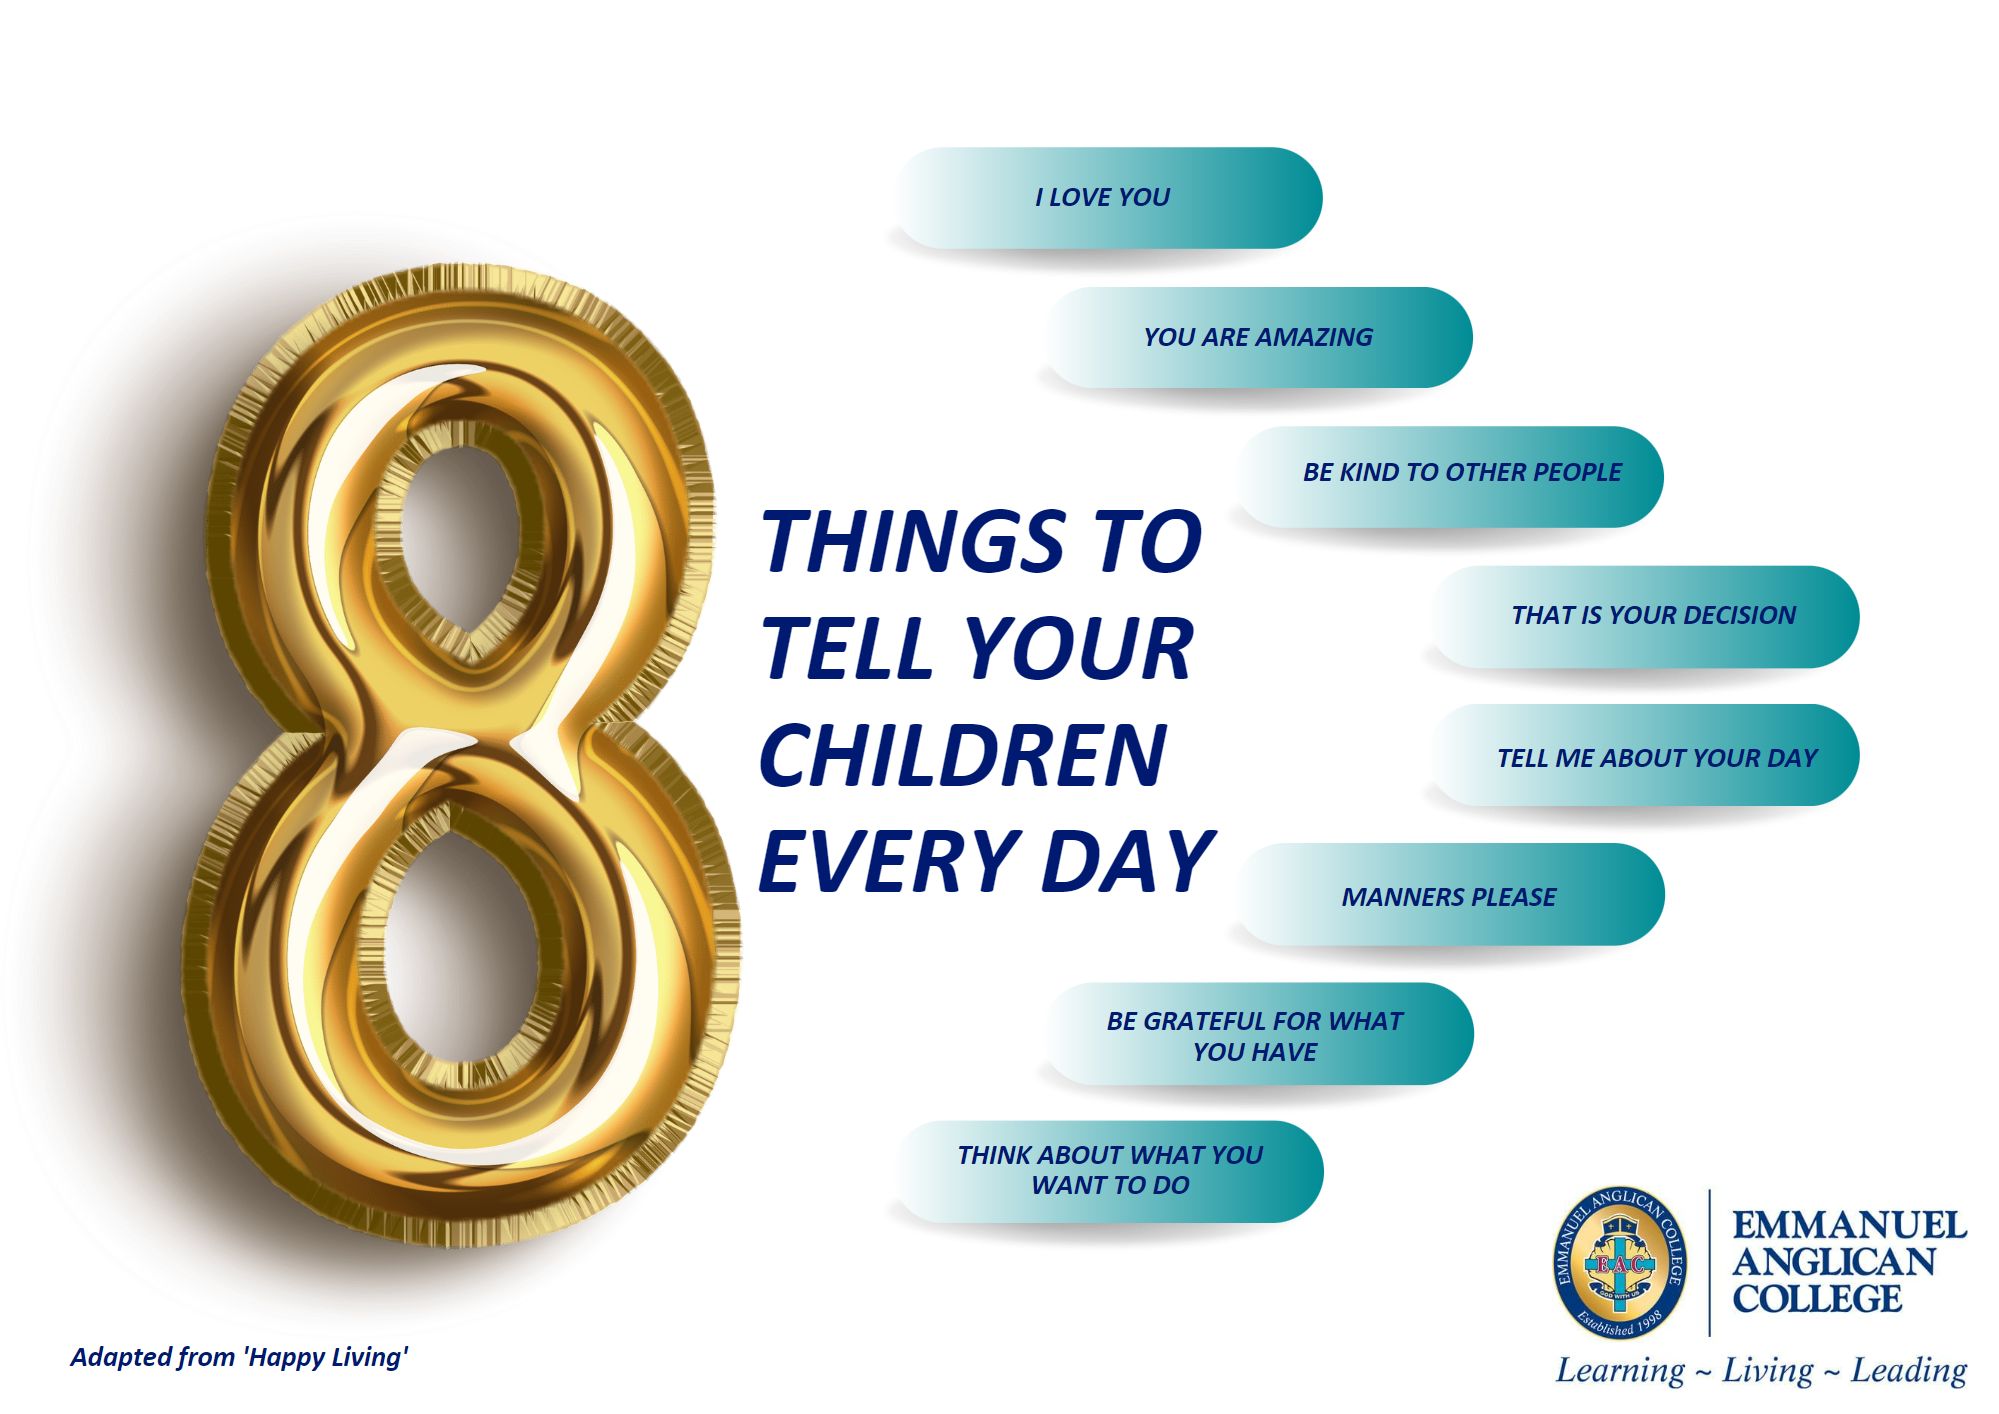 8 Things to Tell Your Children